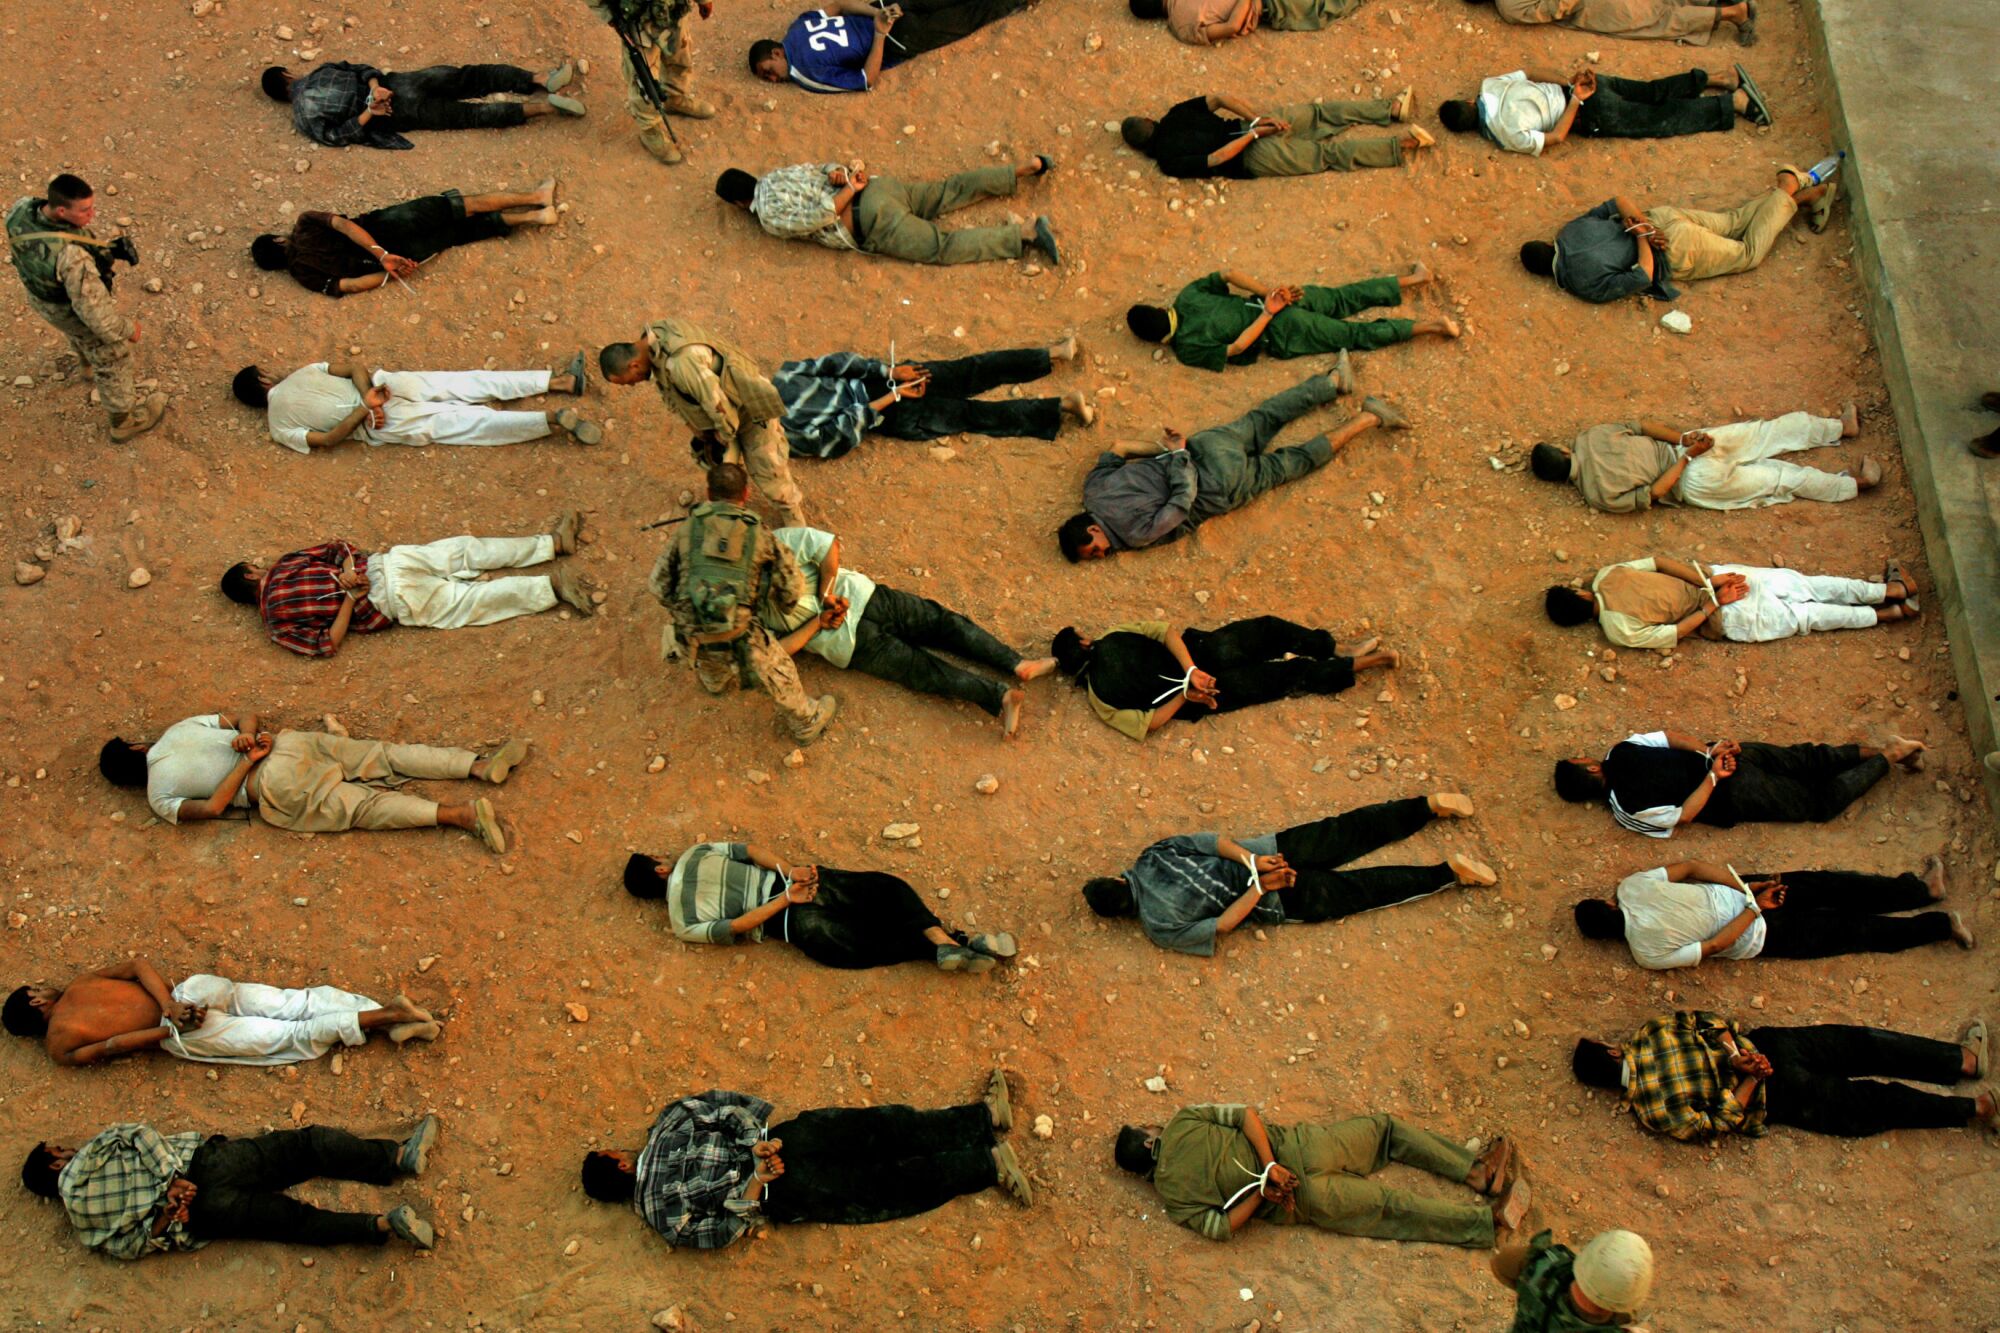 Rows of men lying face down in the dirt with their hands tied behind their backs